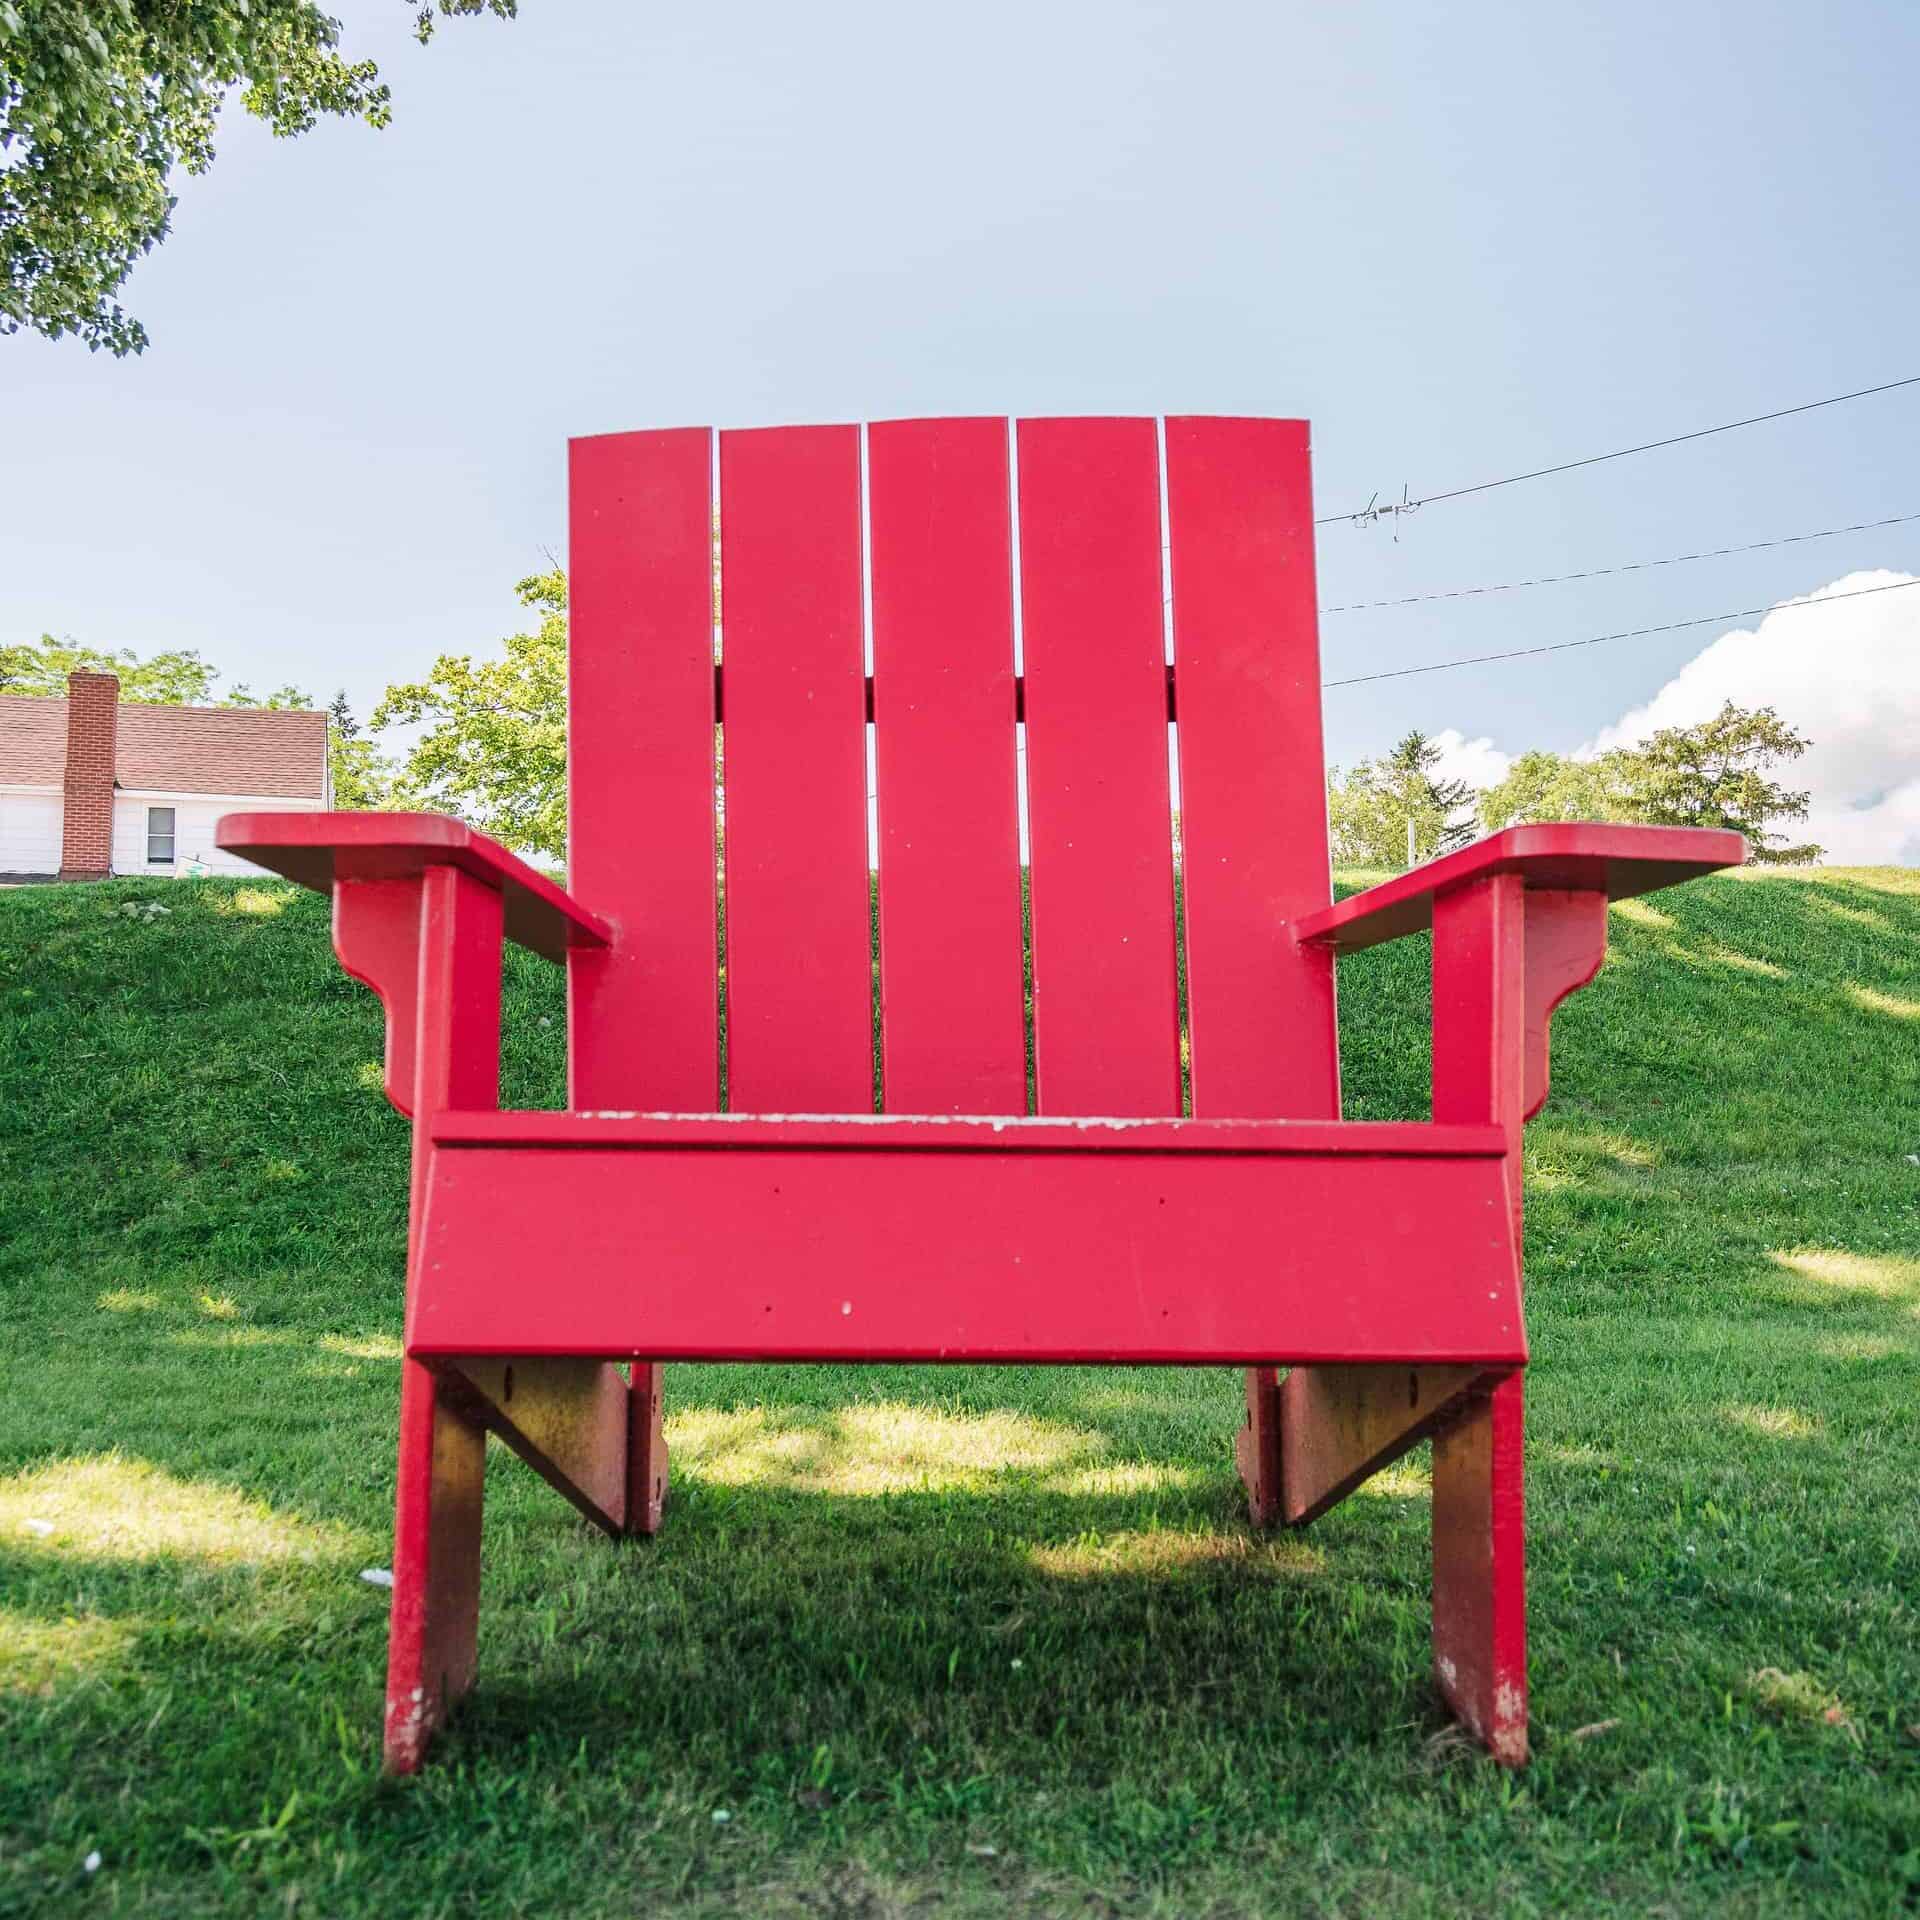 a big red chair is sitting on the green grass on a beautiful sunny day. the chair is the style of a muskoka chair.